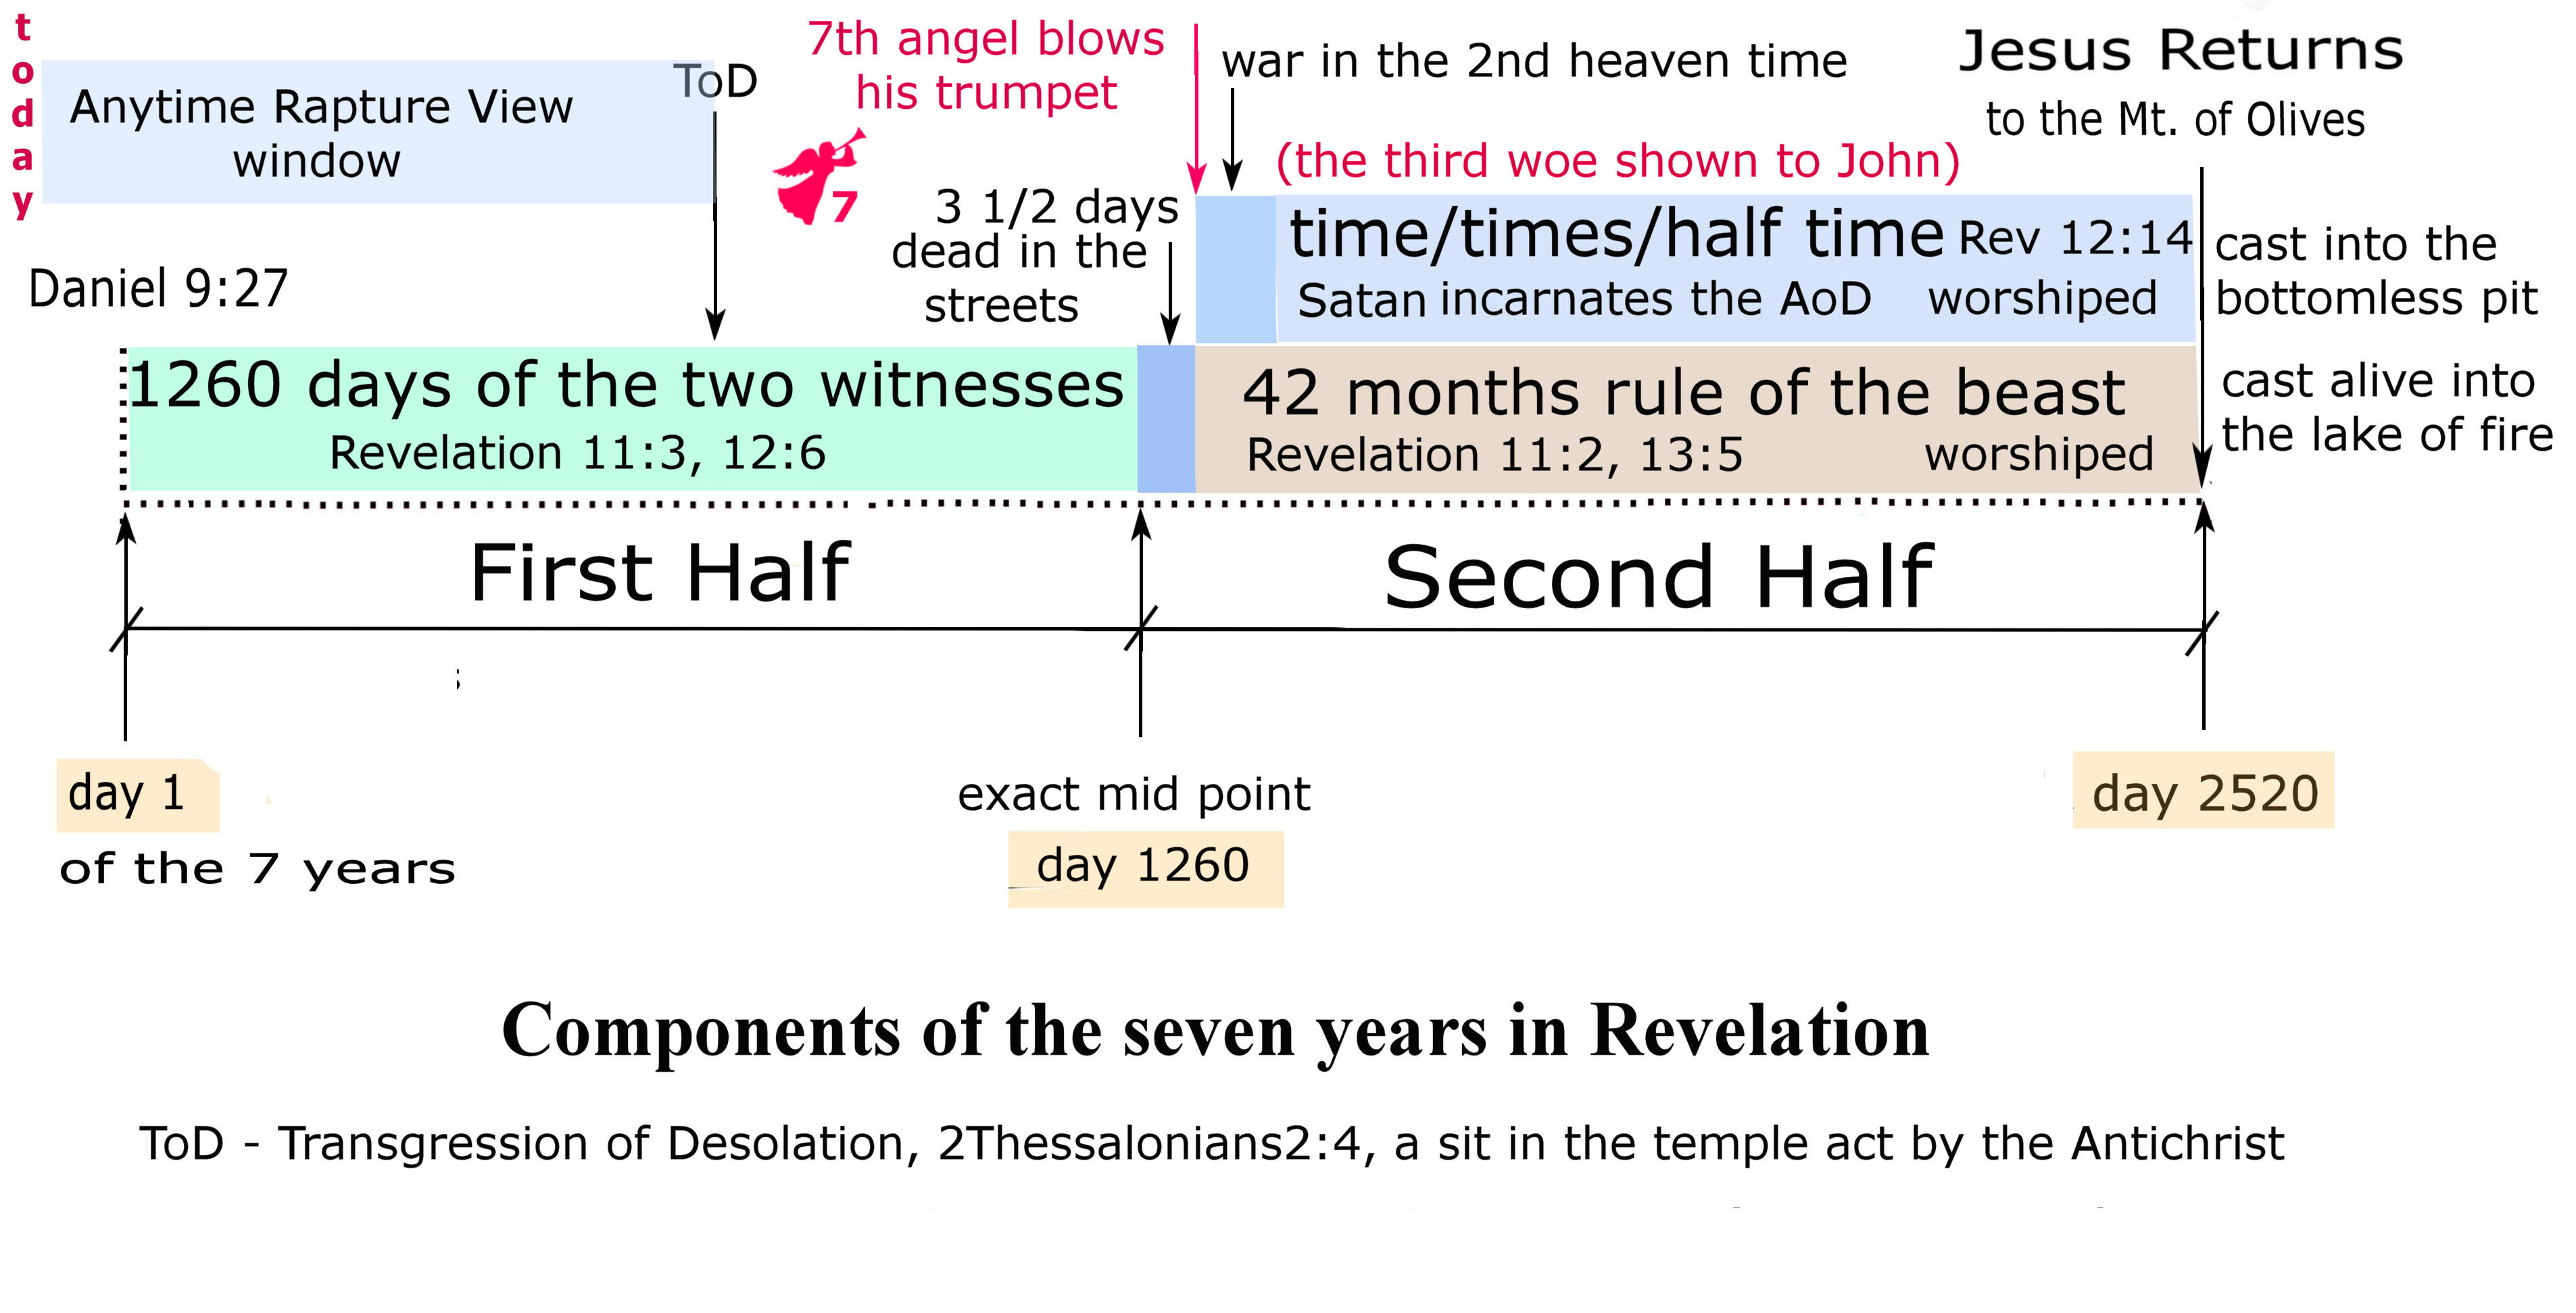 compoinets of the seven years in Revelaiton5 .jpg